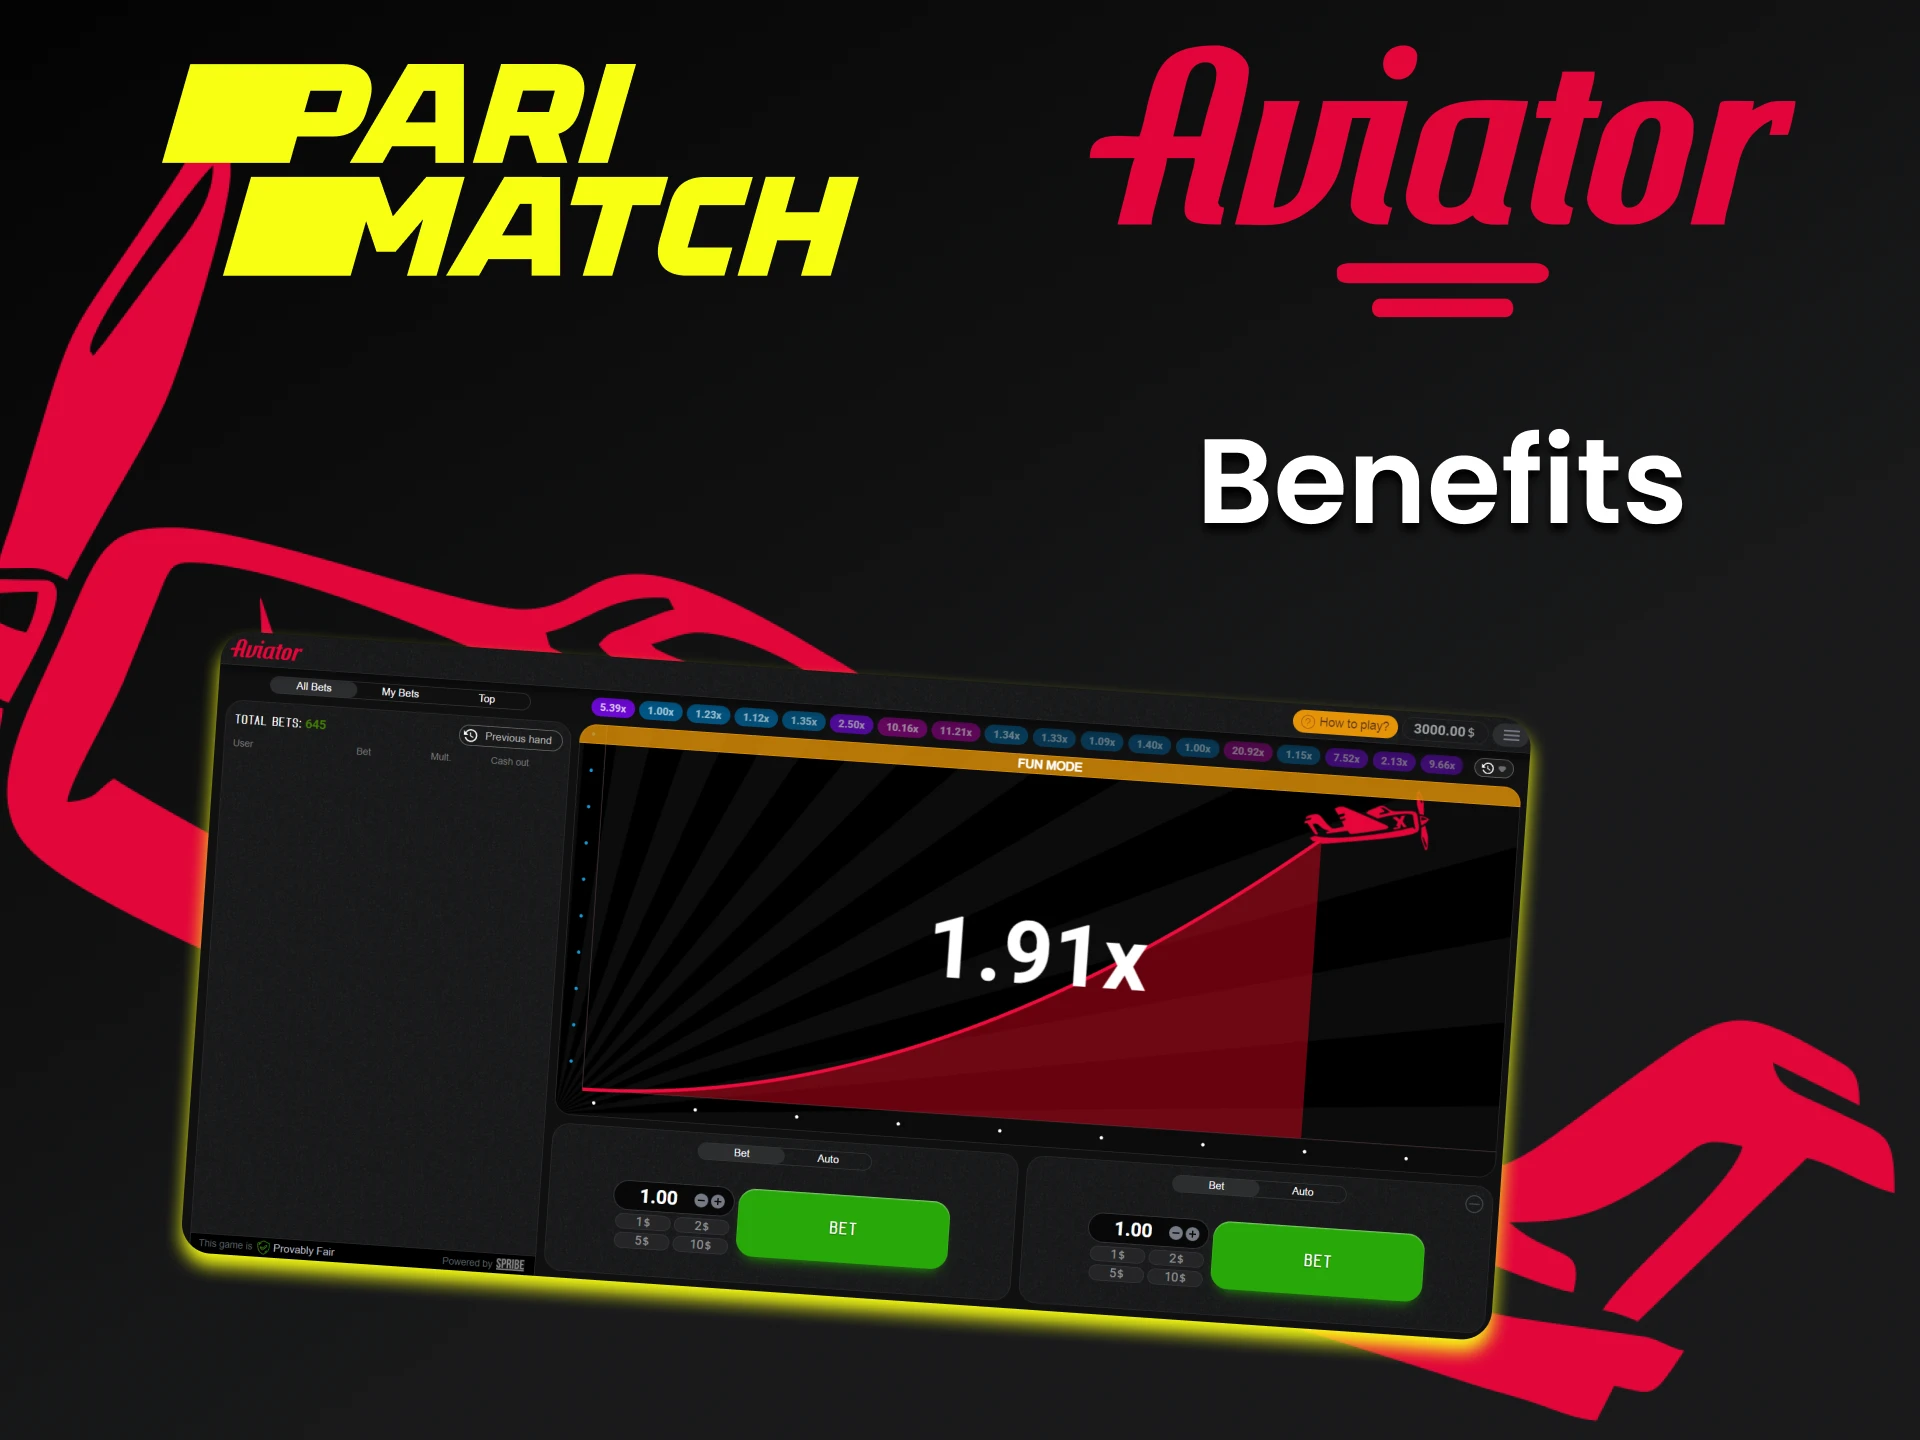 Parimatch will pleasantly surprise you for playing Aviator.